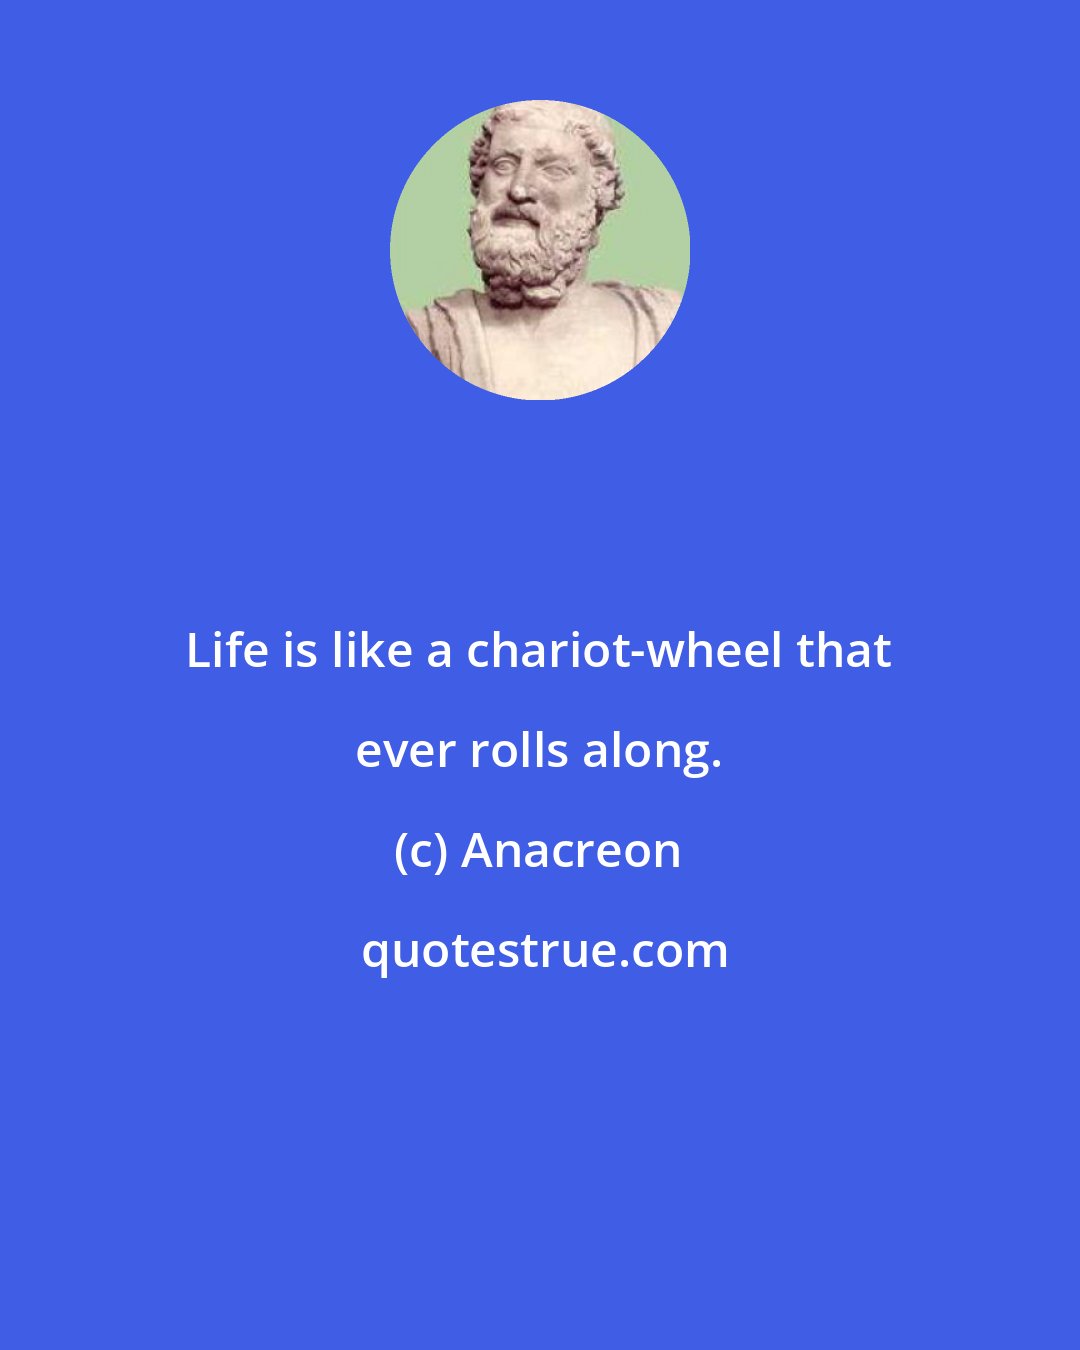 Anacreon: Life is like a chariot-wheel that ever rolls along.